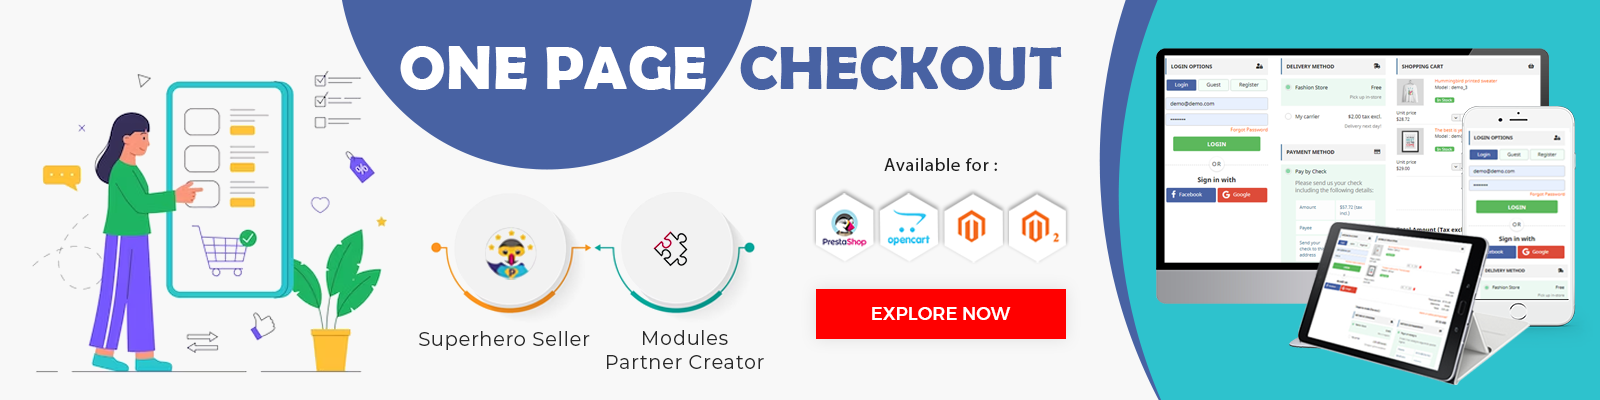 One Page Checkout (1000+ Satisfied customers))